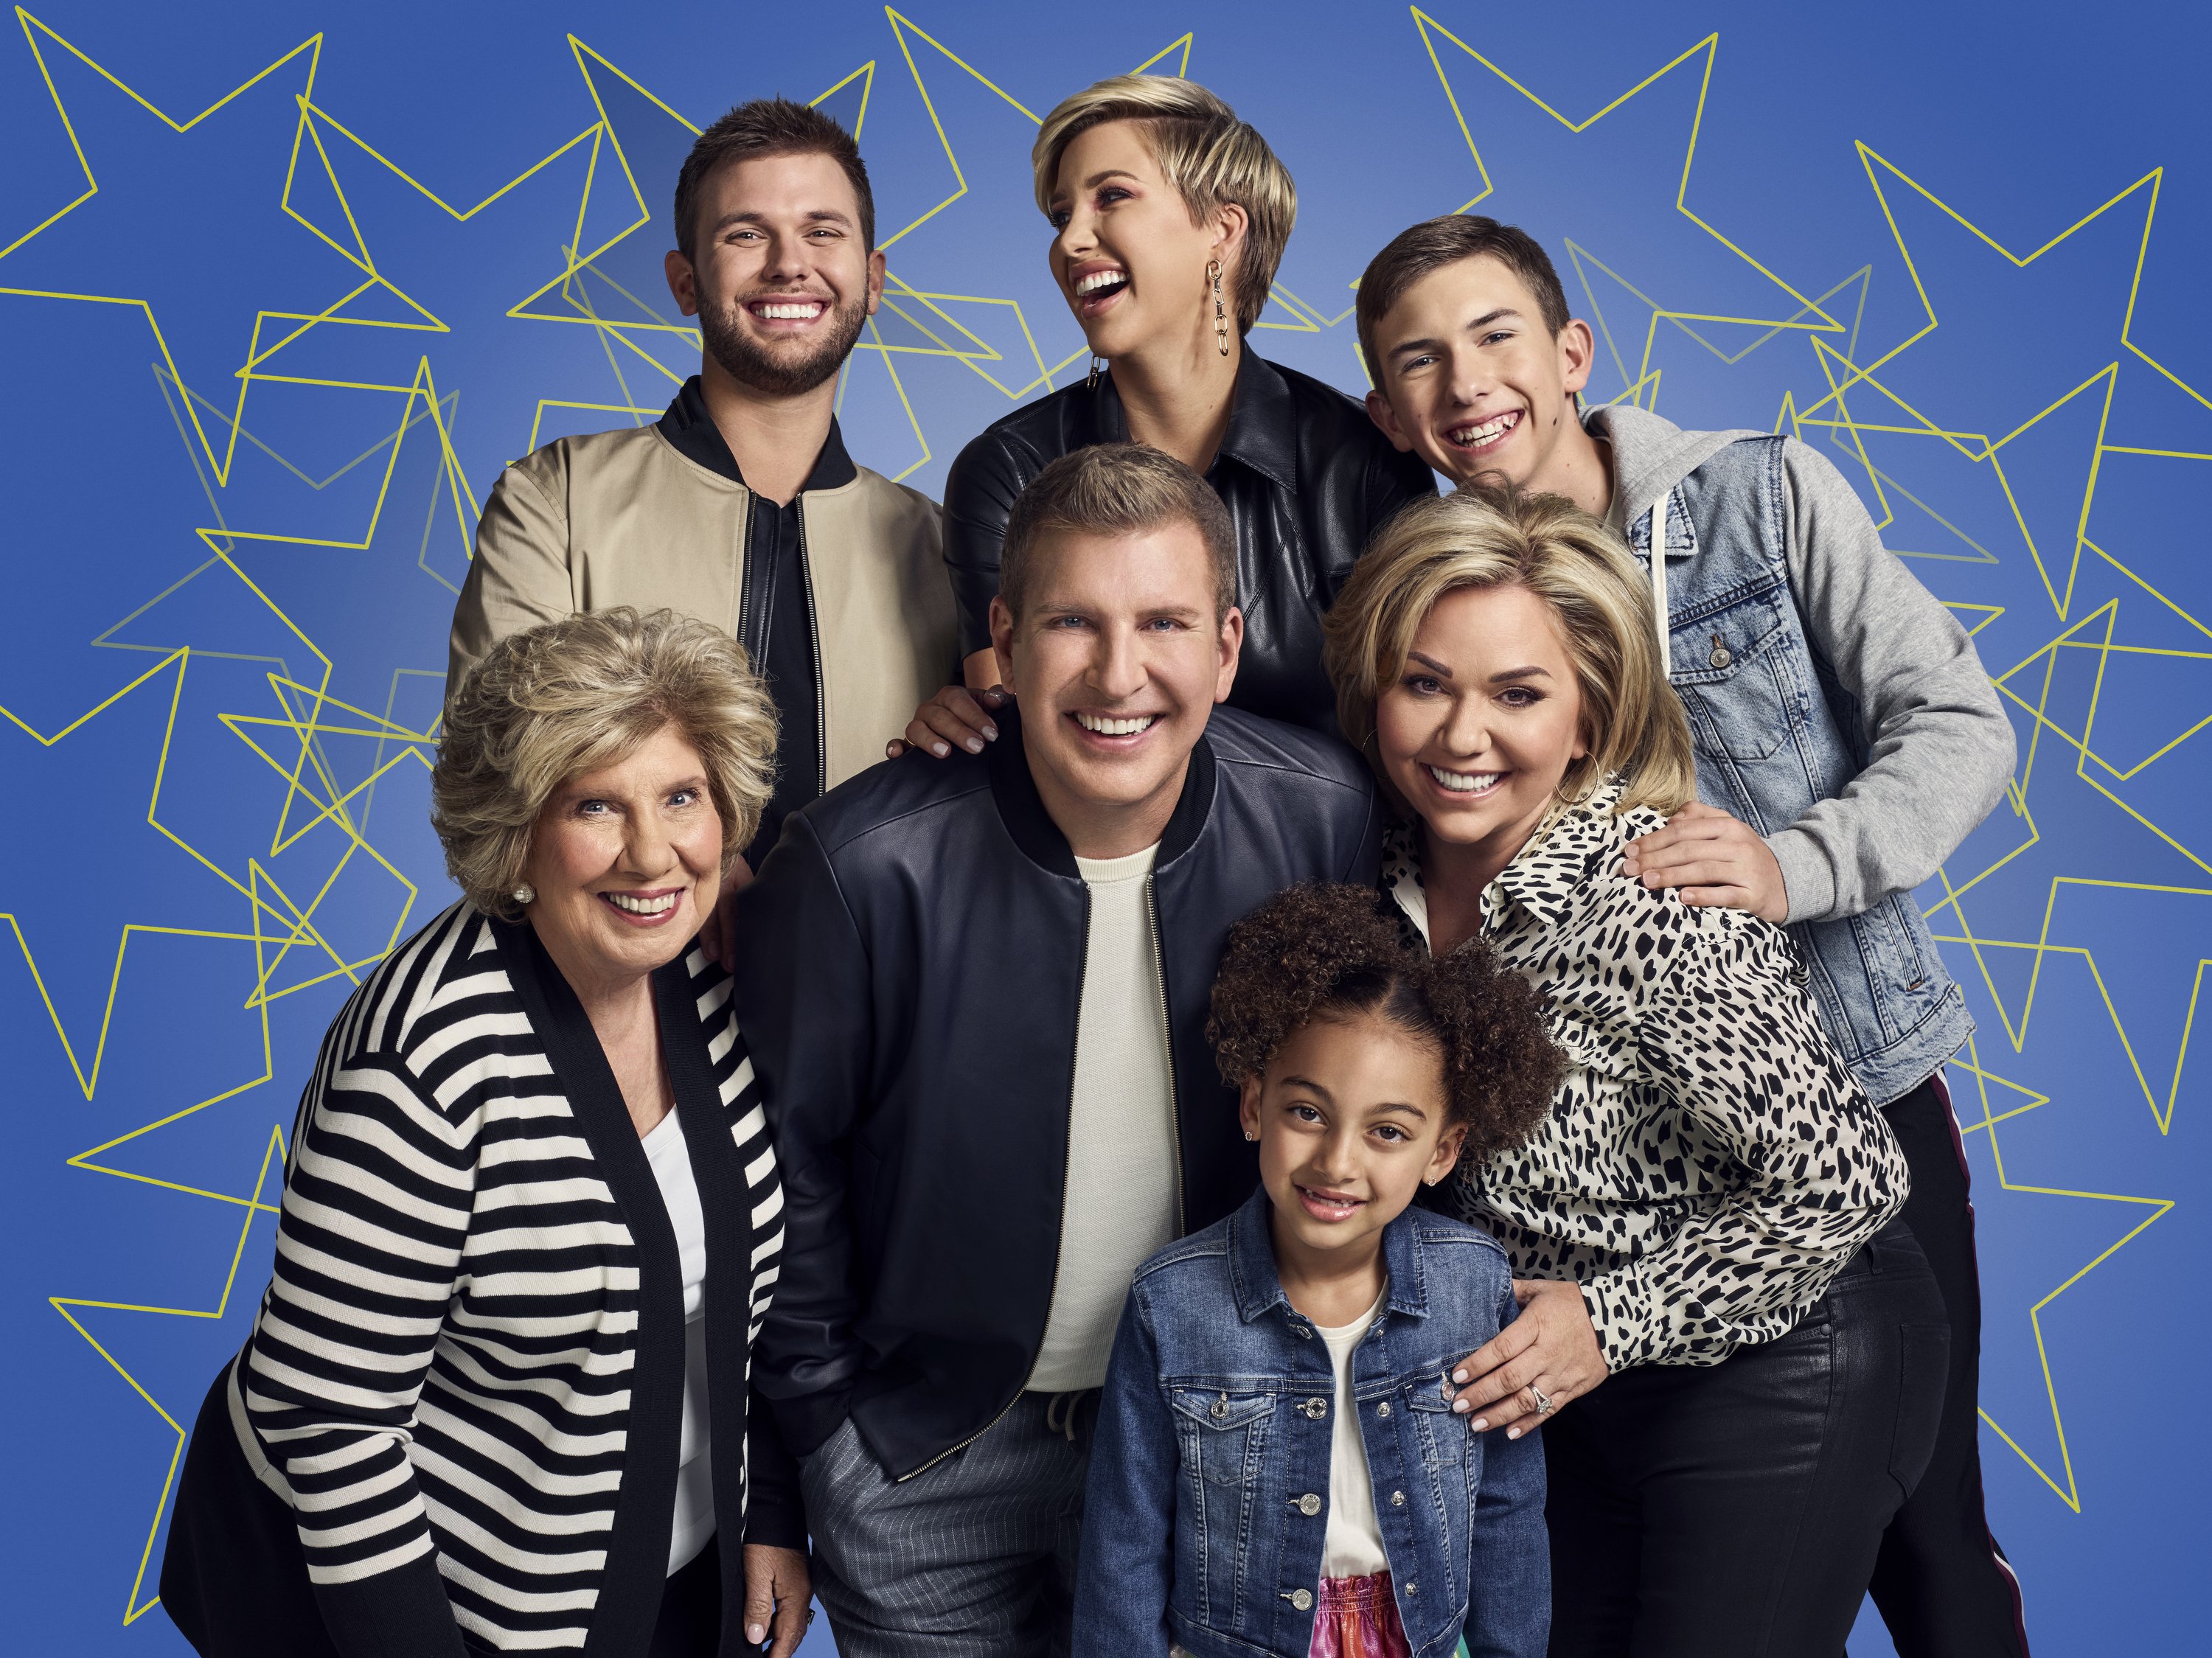 Faye Chrisley, Chase Chrisley, Todd Chrisley, Savannah Chrisley, Chloe Chrisley, Julie Chrisley, and Grayson Chrisley from "Chrisley Knows Best." Source: Getty Images.